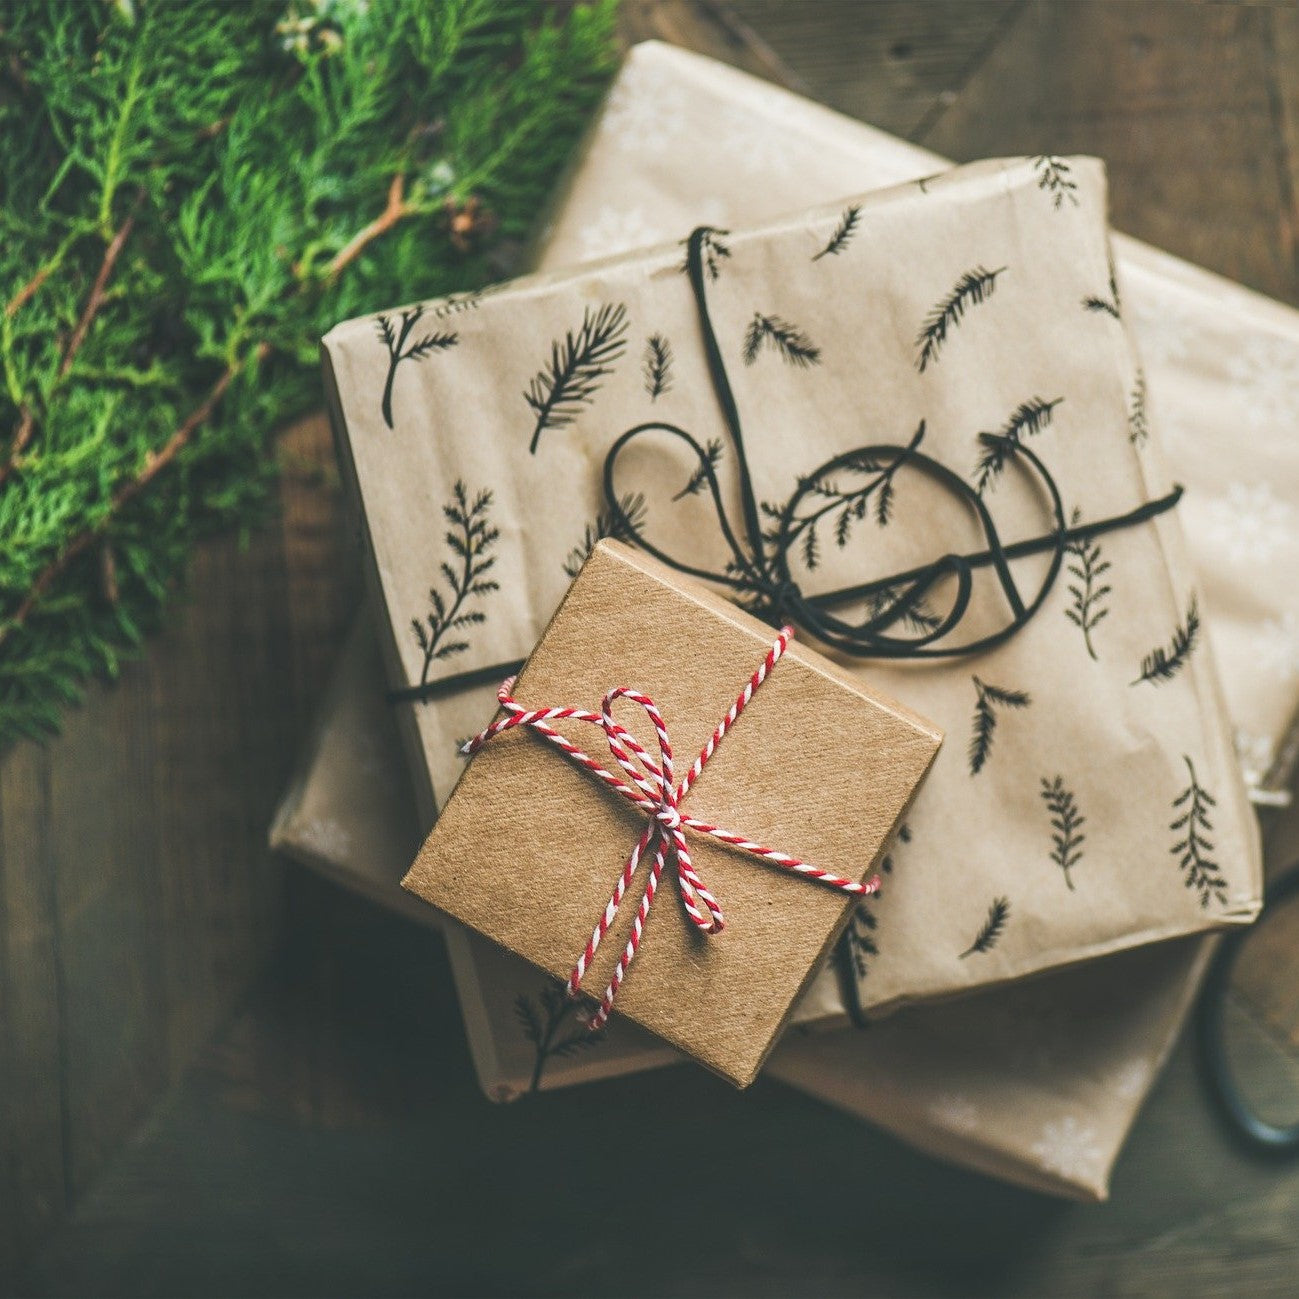 Truly Special Christmas Gift Ideas for Women Who Have Everything